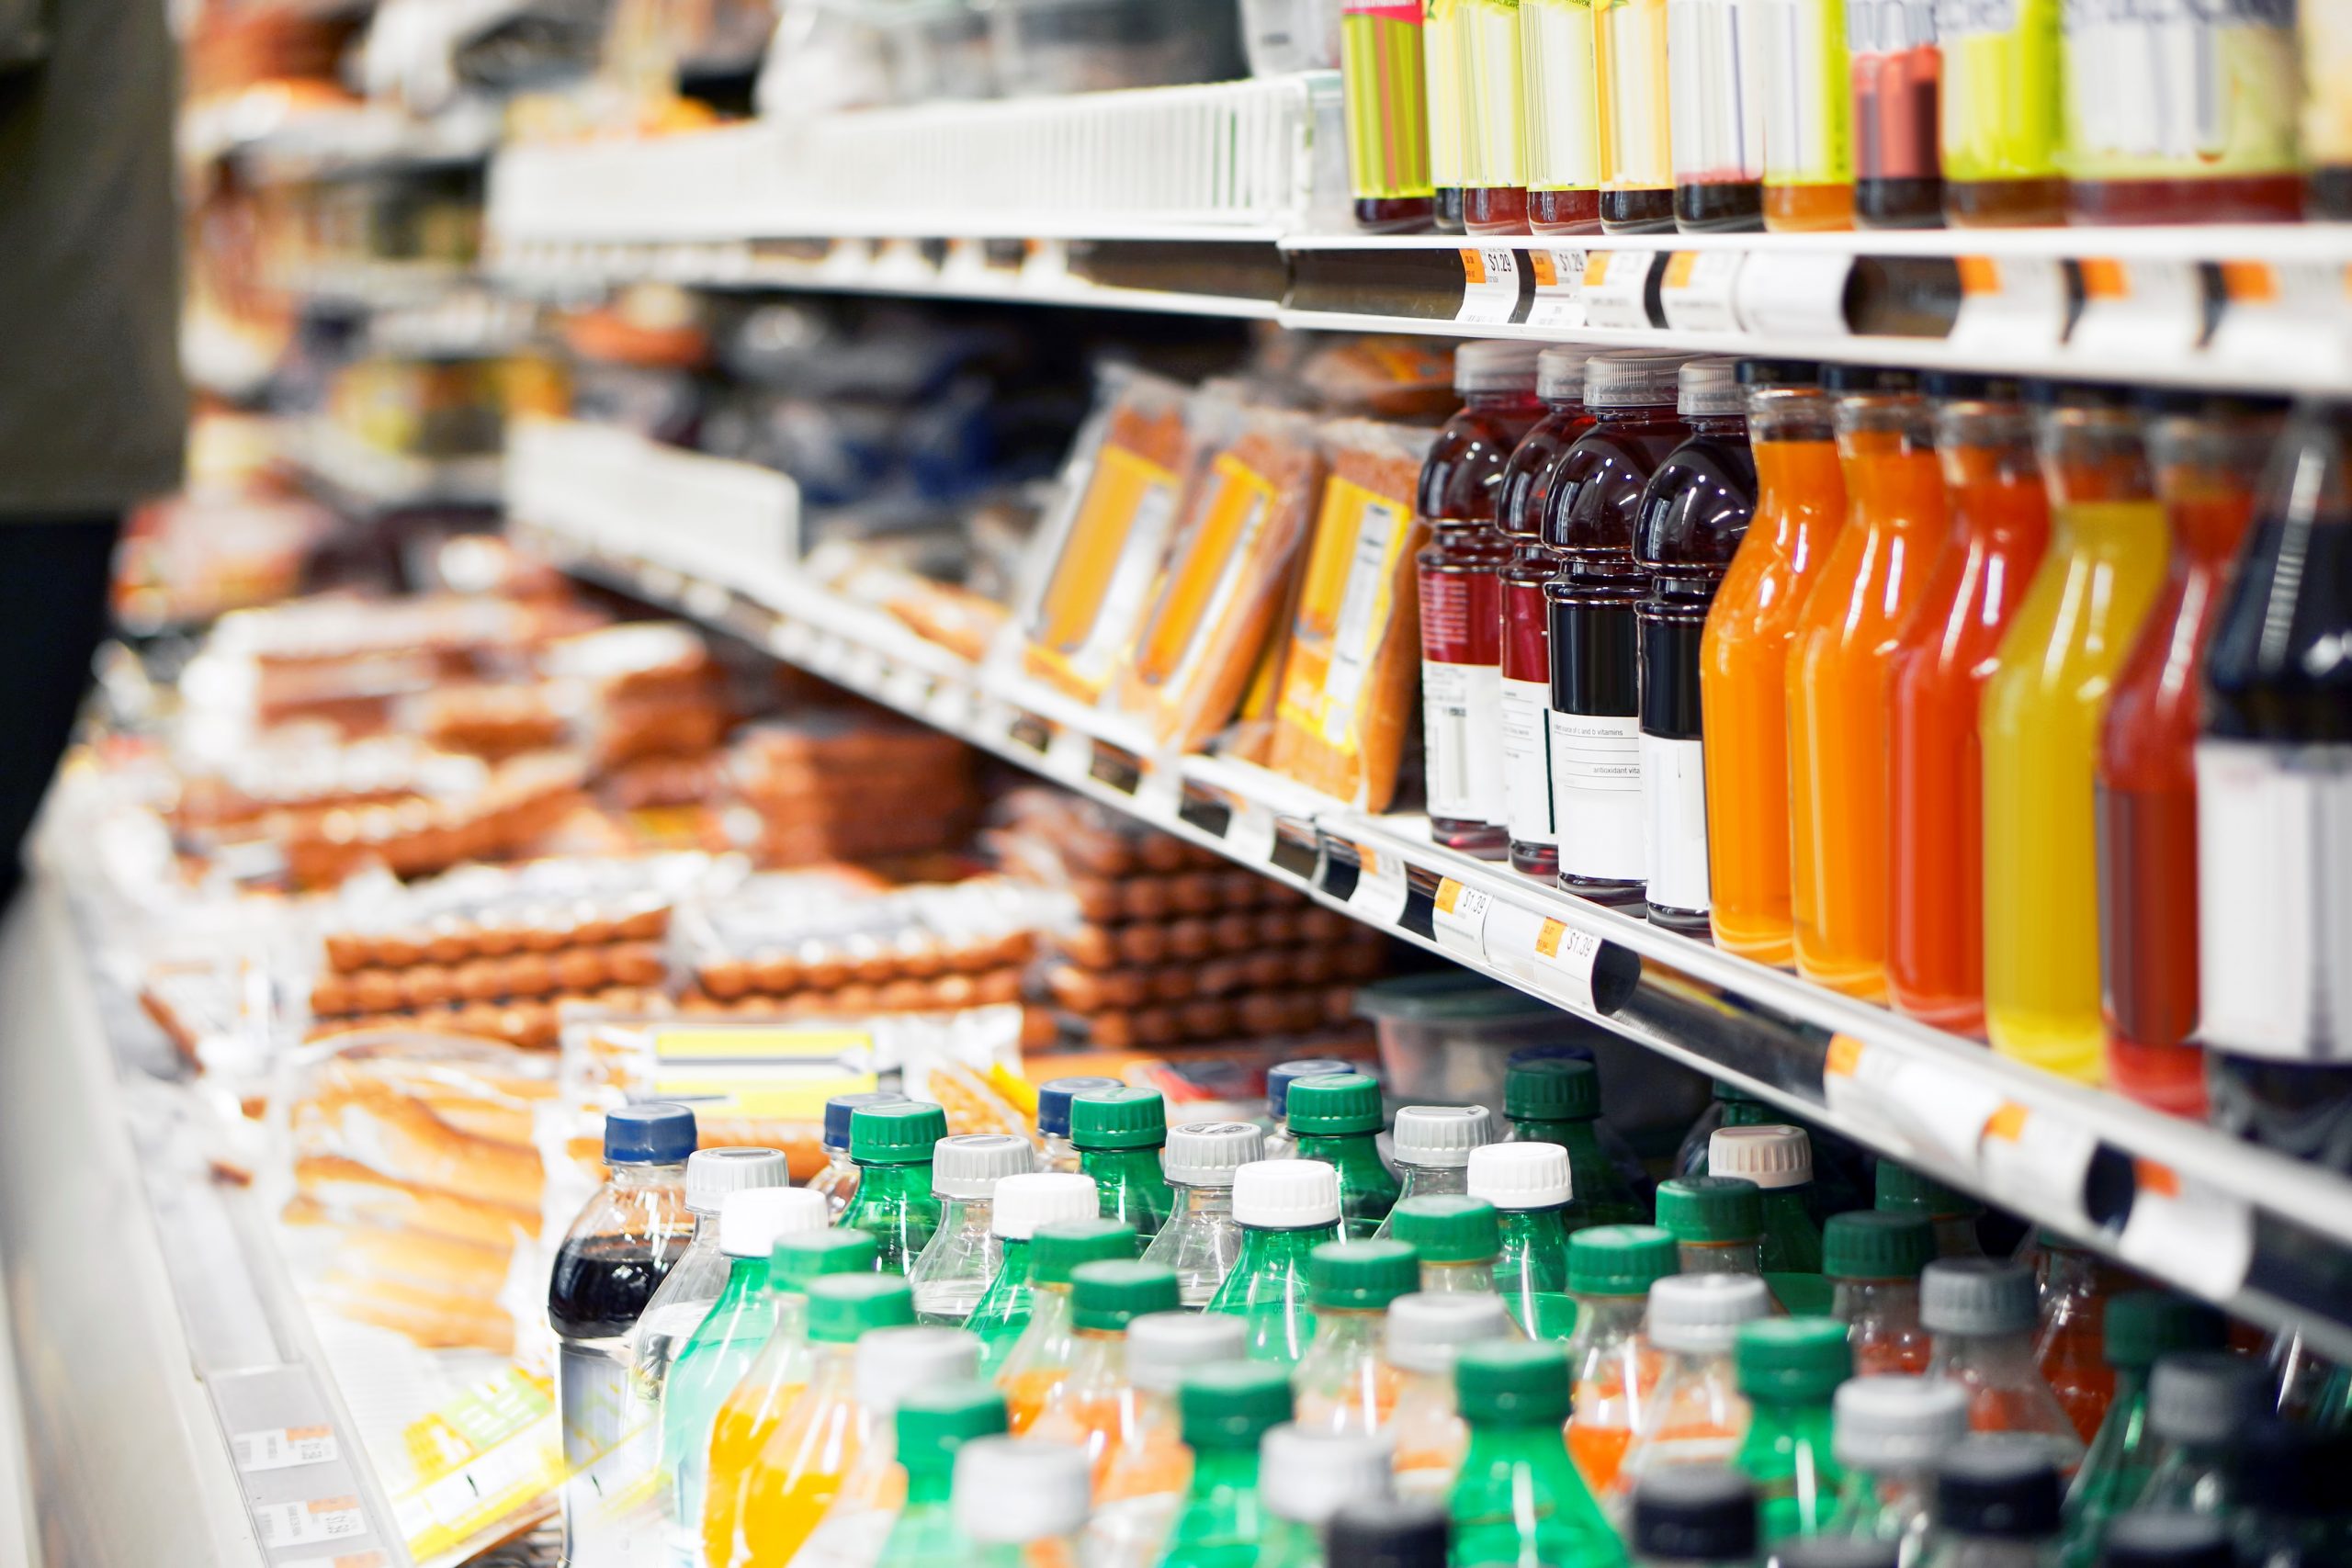 Refrigerated foods in store, including chilled drinks and food.